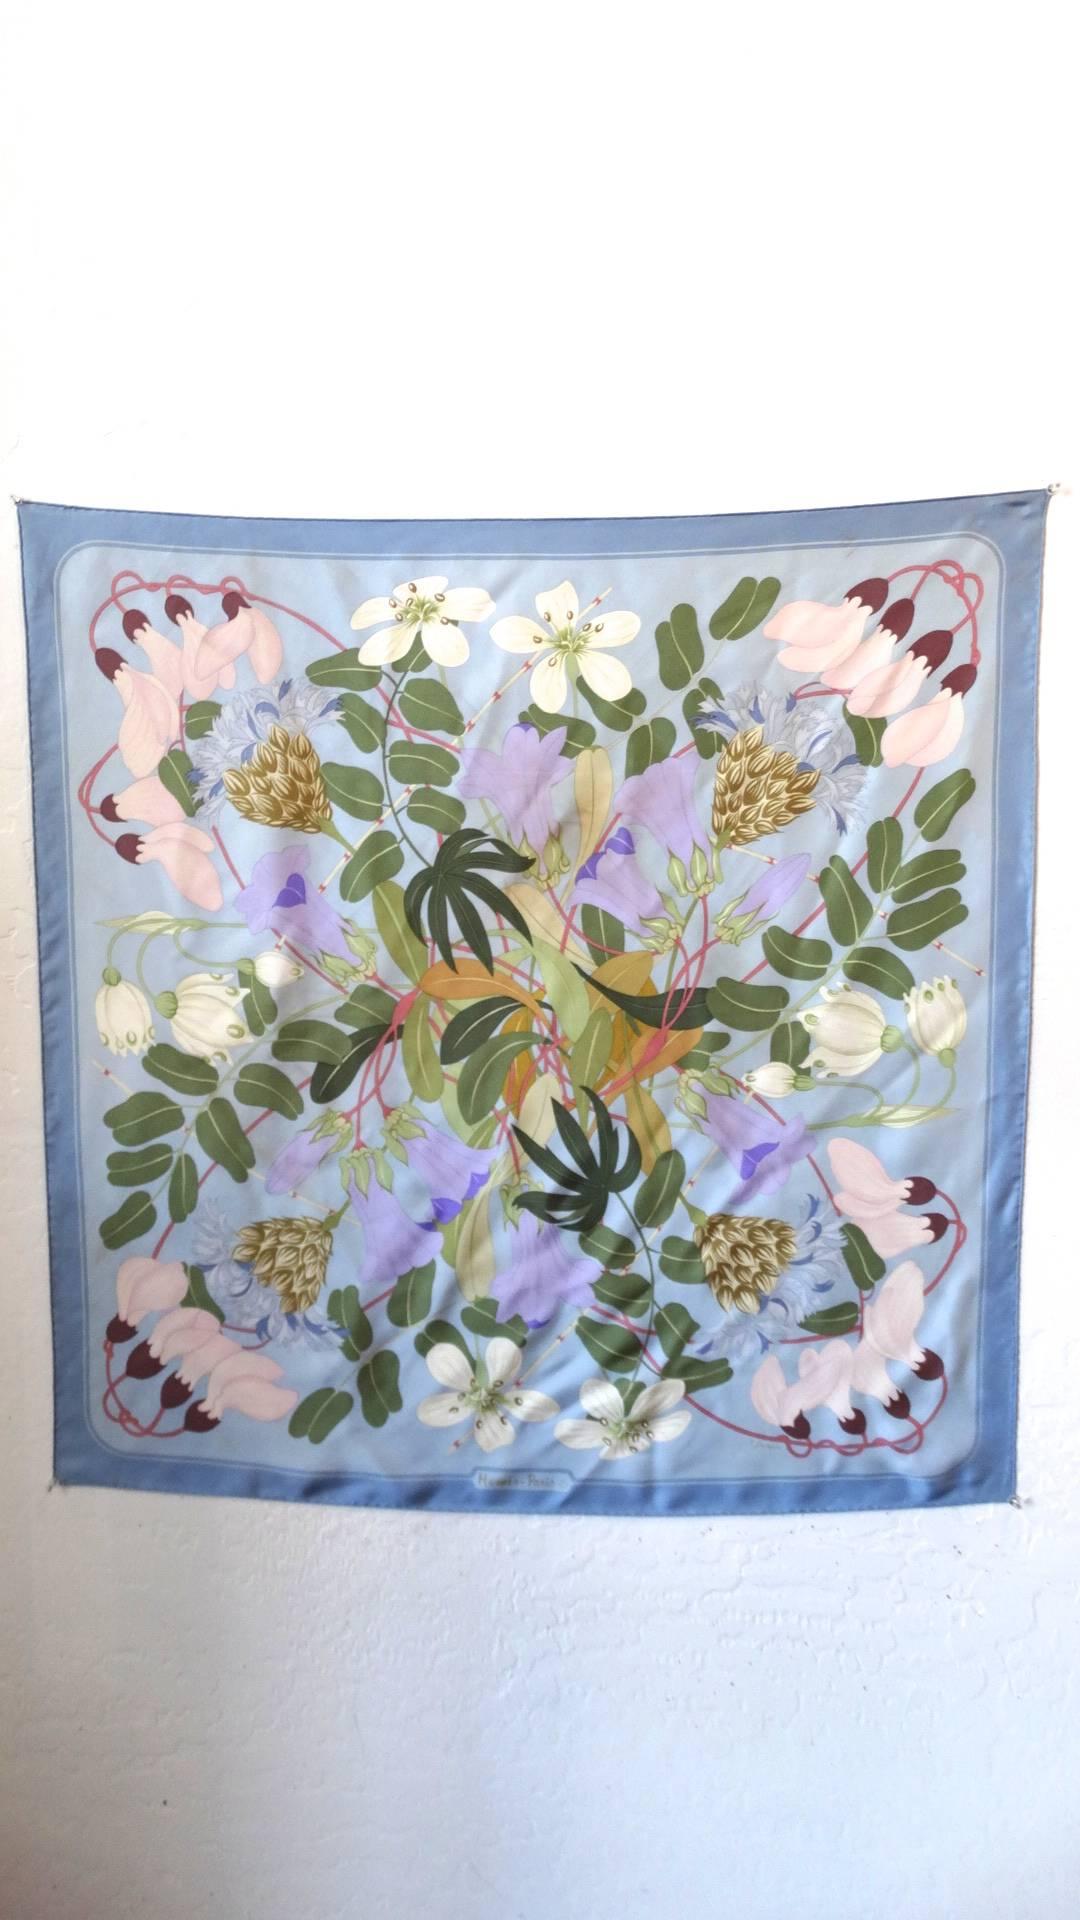 The most amazing 1983 Flora Graeca Hermes Scarf designed & signed by Niki Goulandris. A pastel blue background with a darker blue trim is complemented by a collection of purple, white and pink flowers along with greenery to create an exquisite